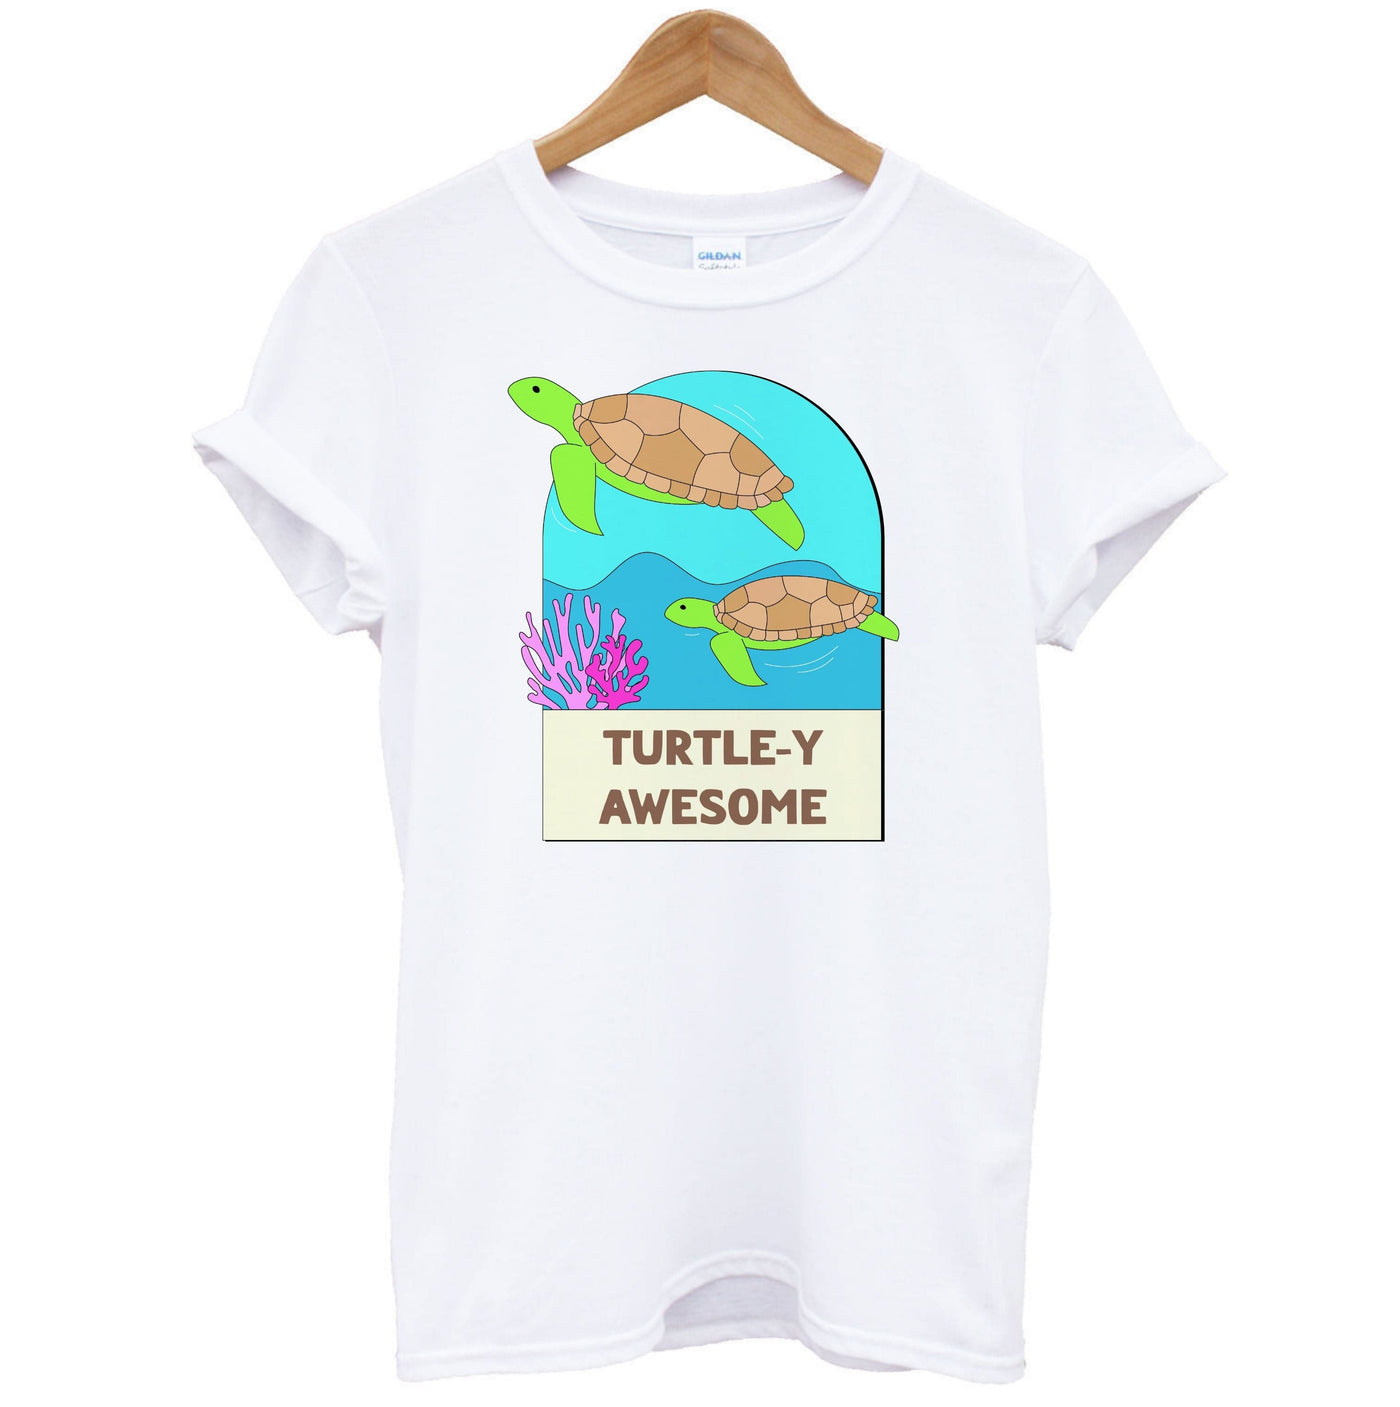 Turtle-y Awesome - Sealife T-Shirt